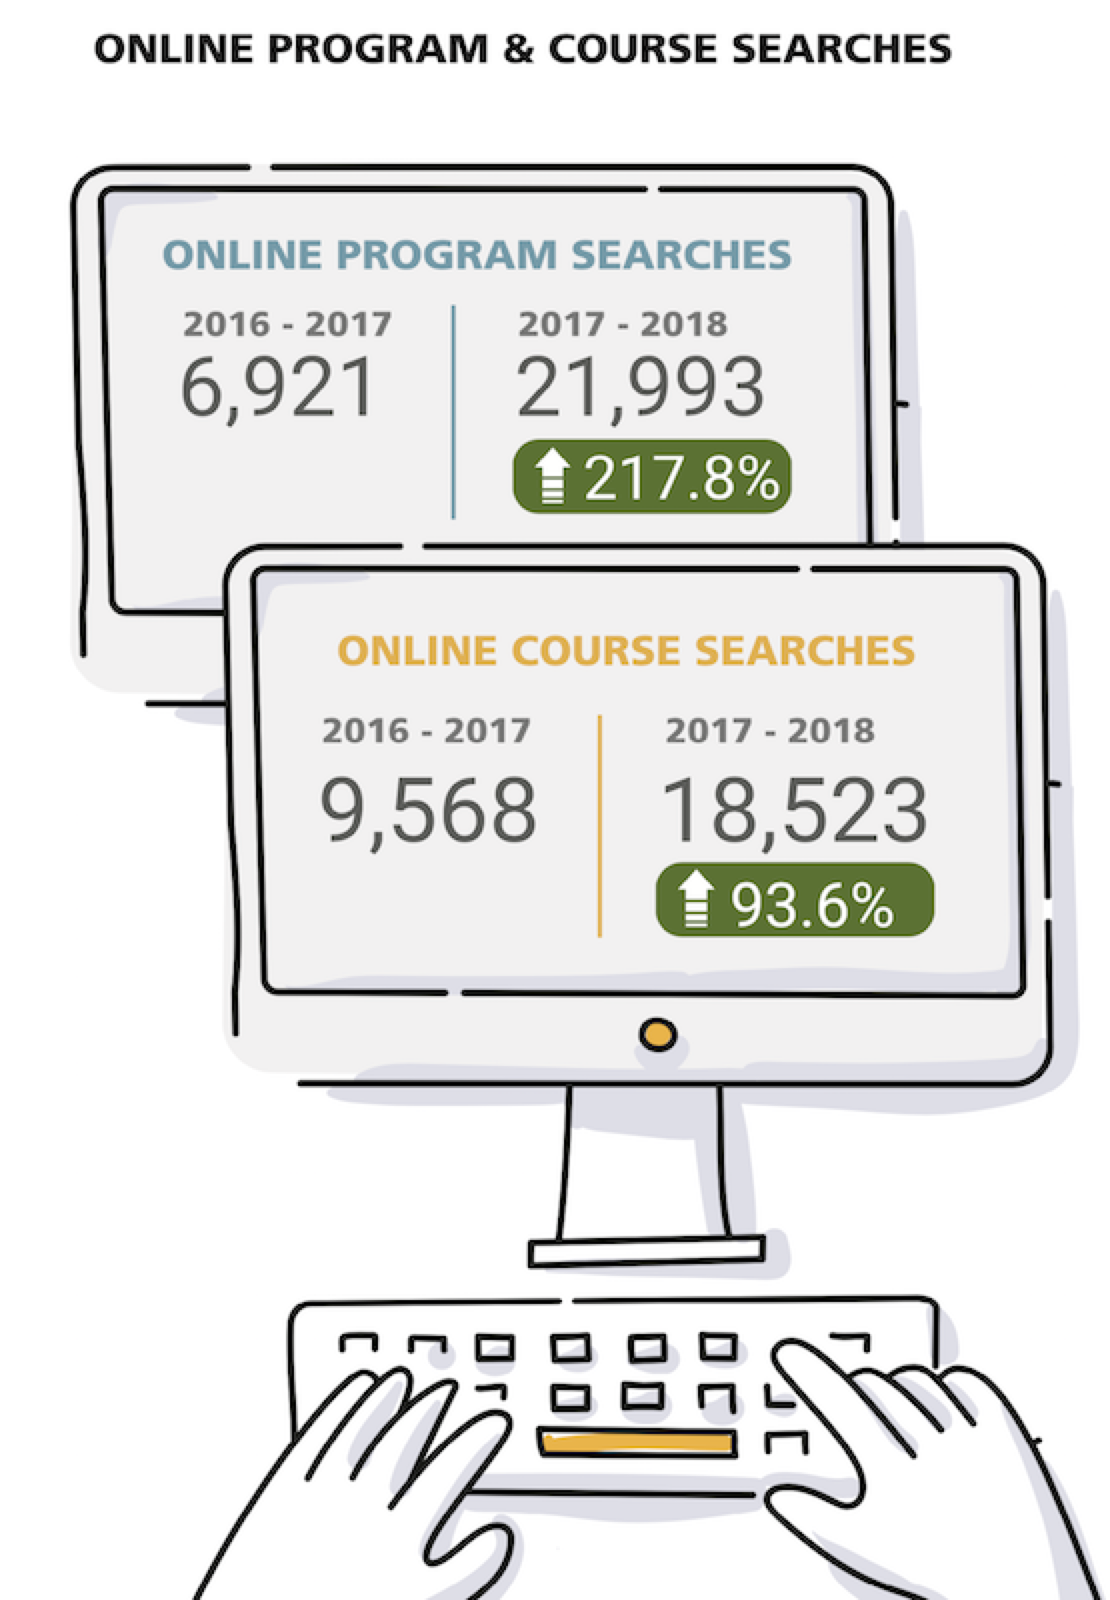 Course and program searches